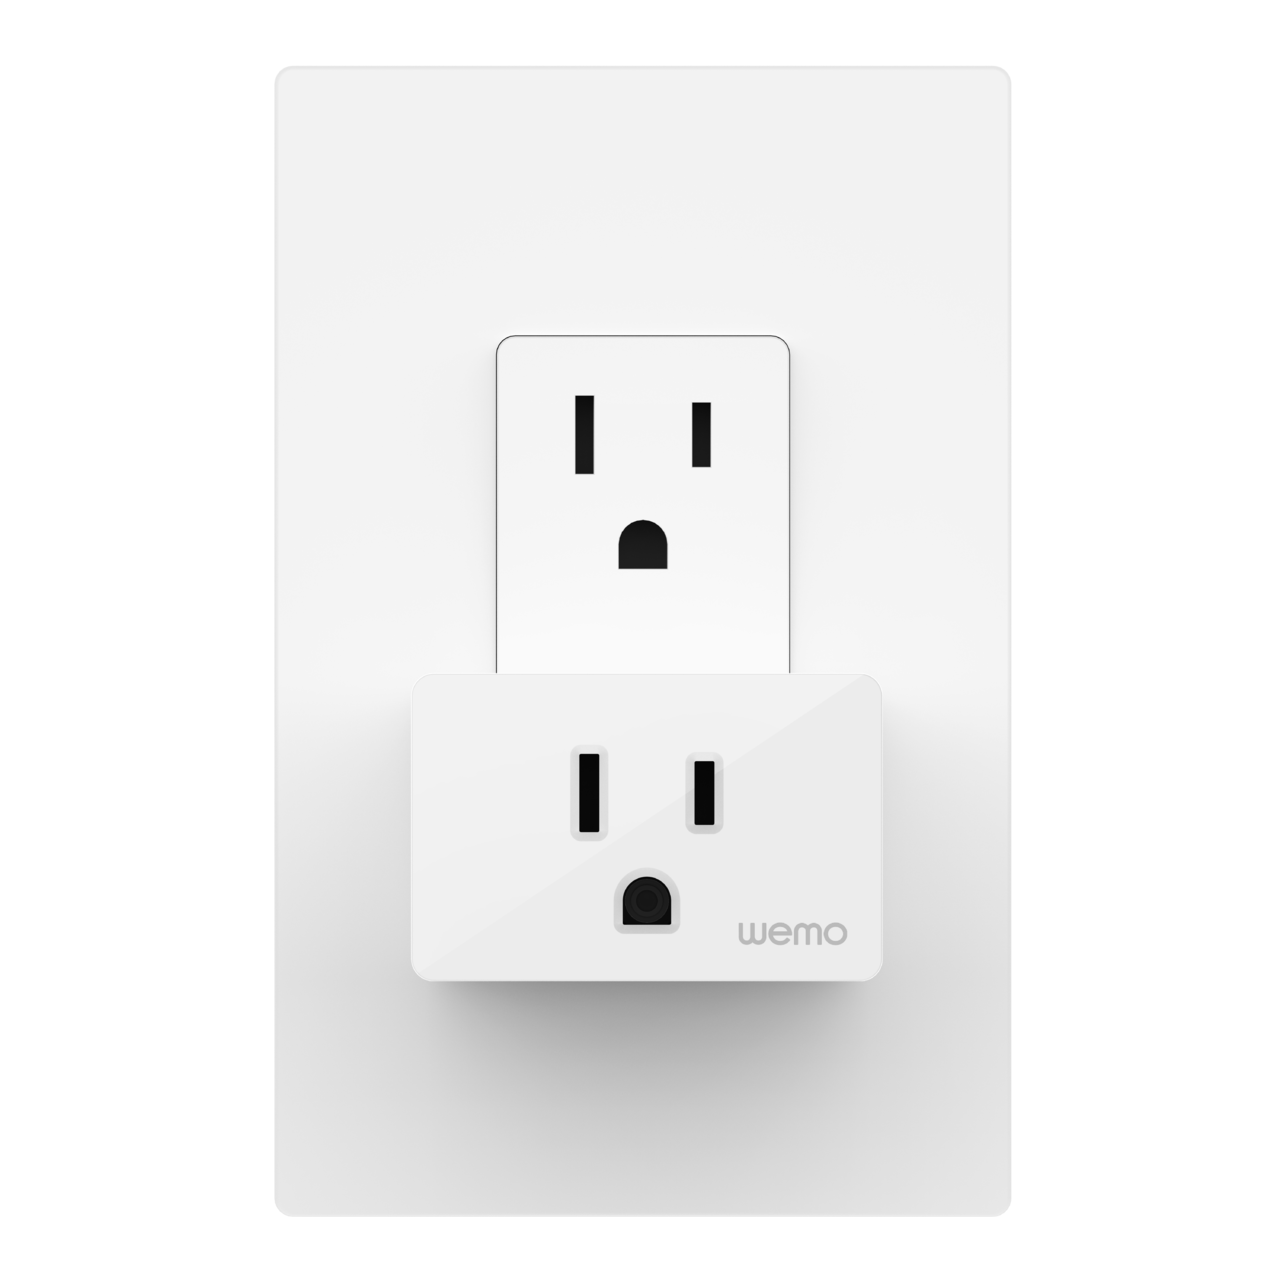 Comparing WeMo Smart Plugs. A quick review of the Mini Smart Plug